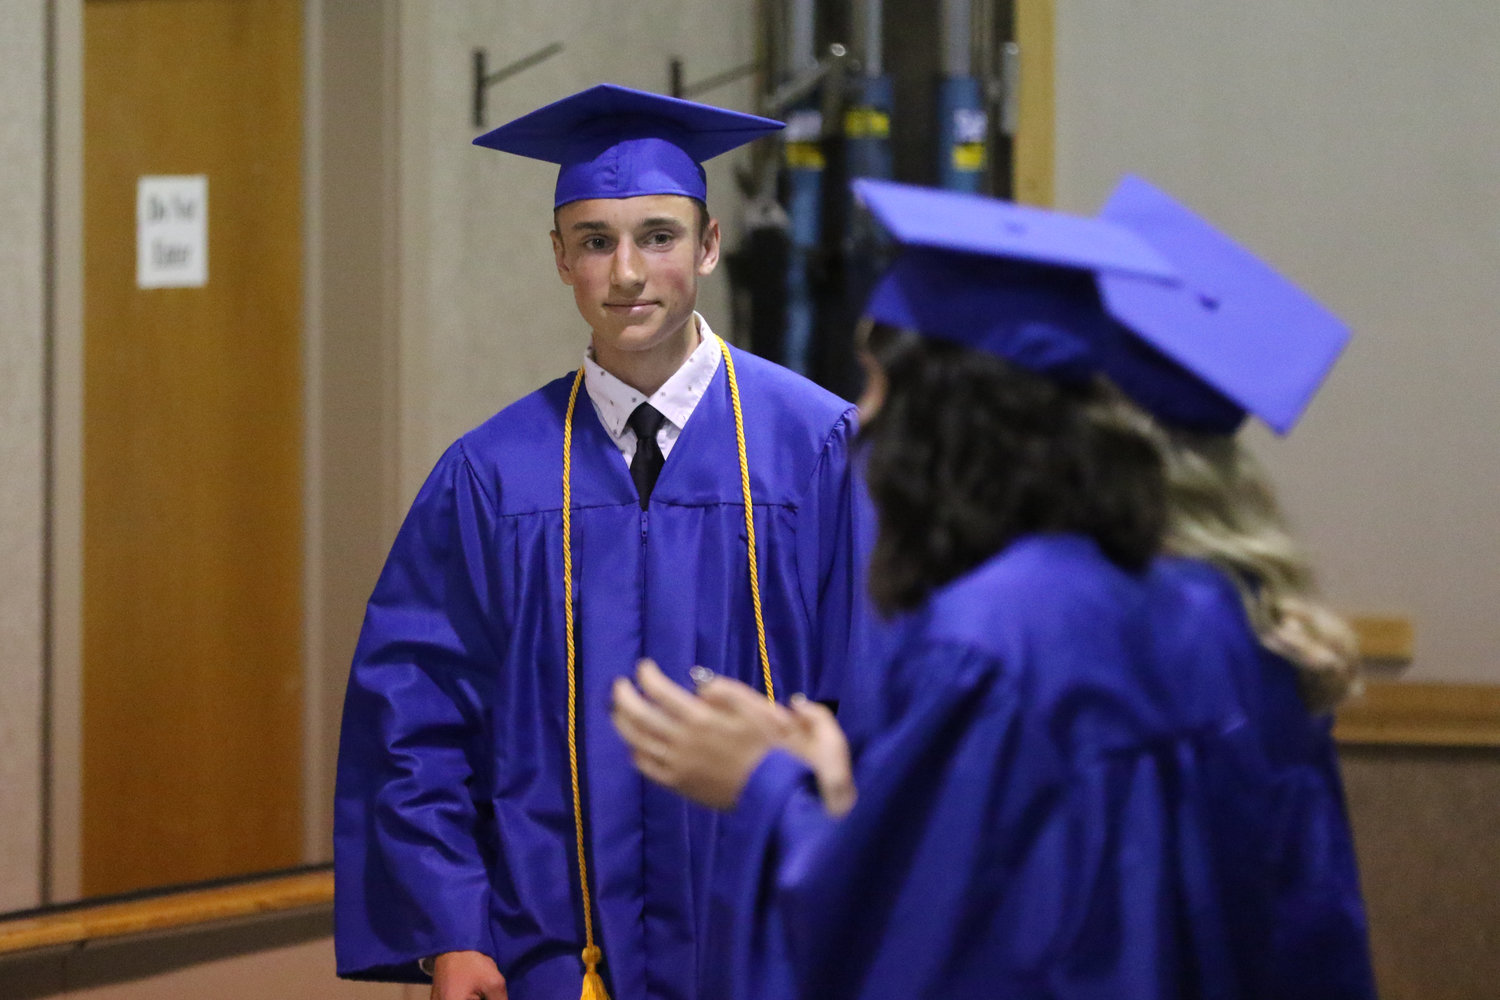 Valedictorian Jamison Stutzman returns to his seat after speaking during Pathway Christian School's graduation ceremony on May 16, 2021.